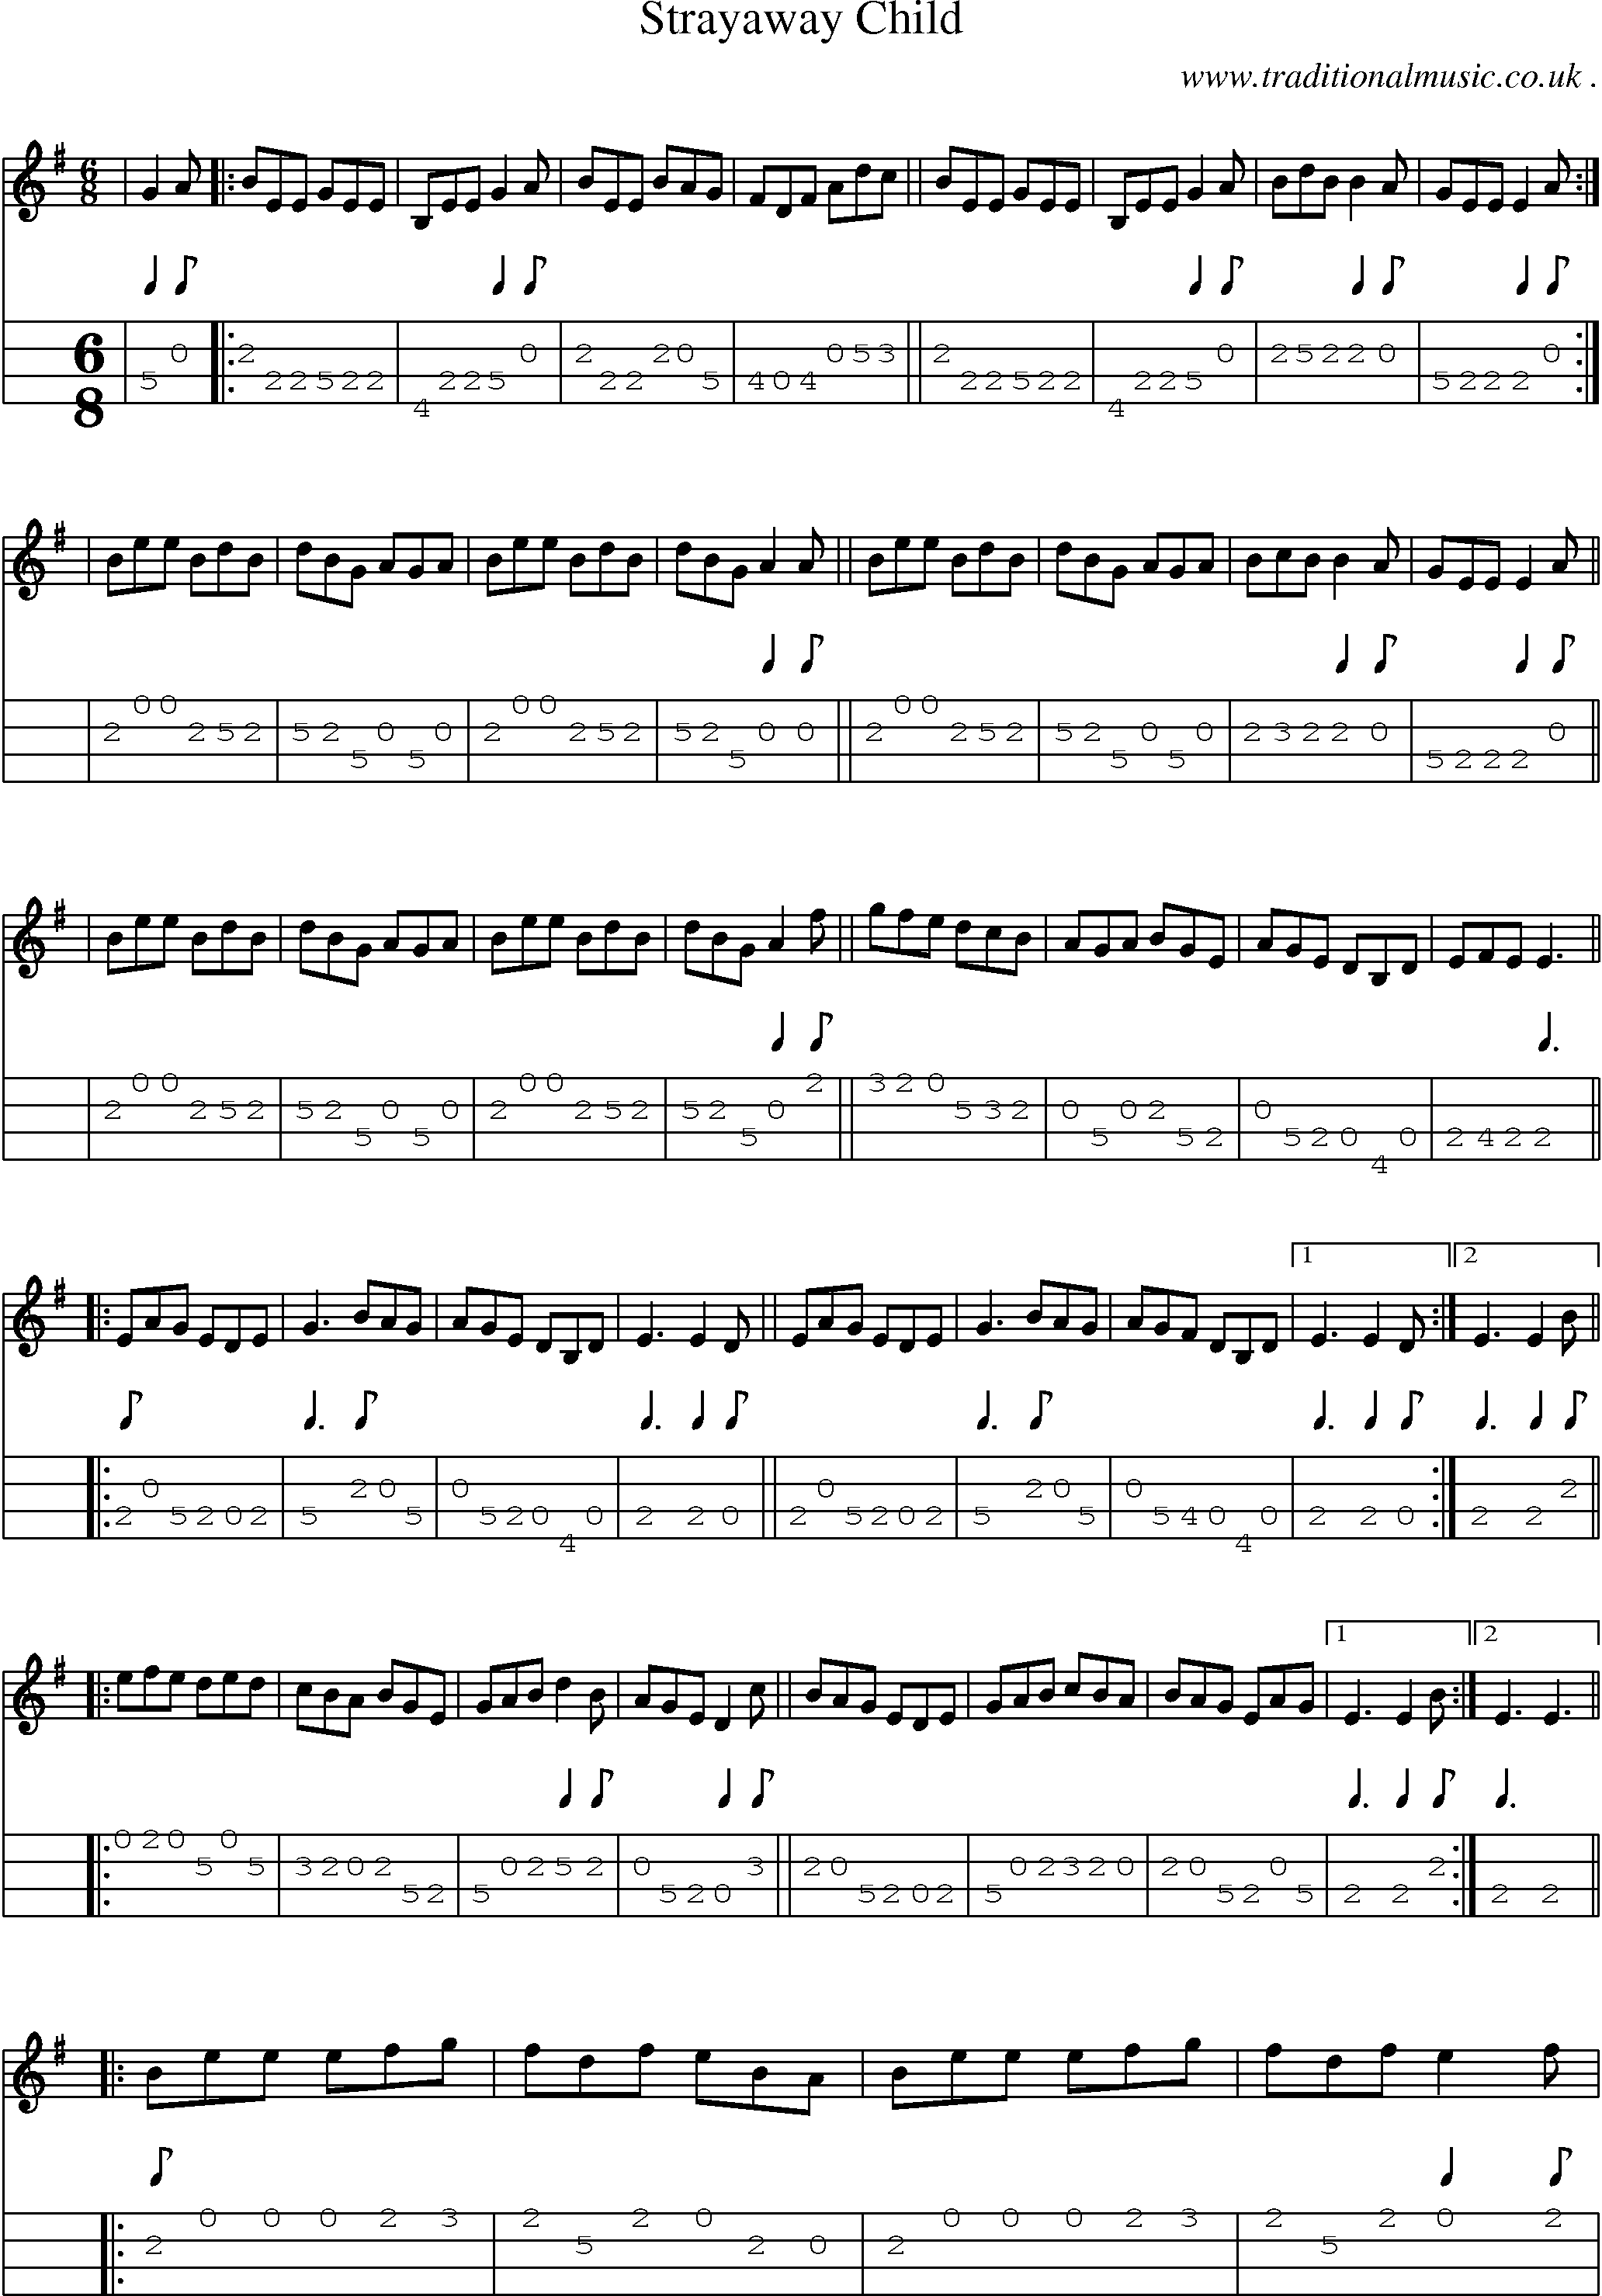 Sheet-music  score, Chords and Mandolin Tabs for Strayaway Child